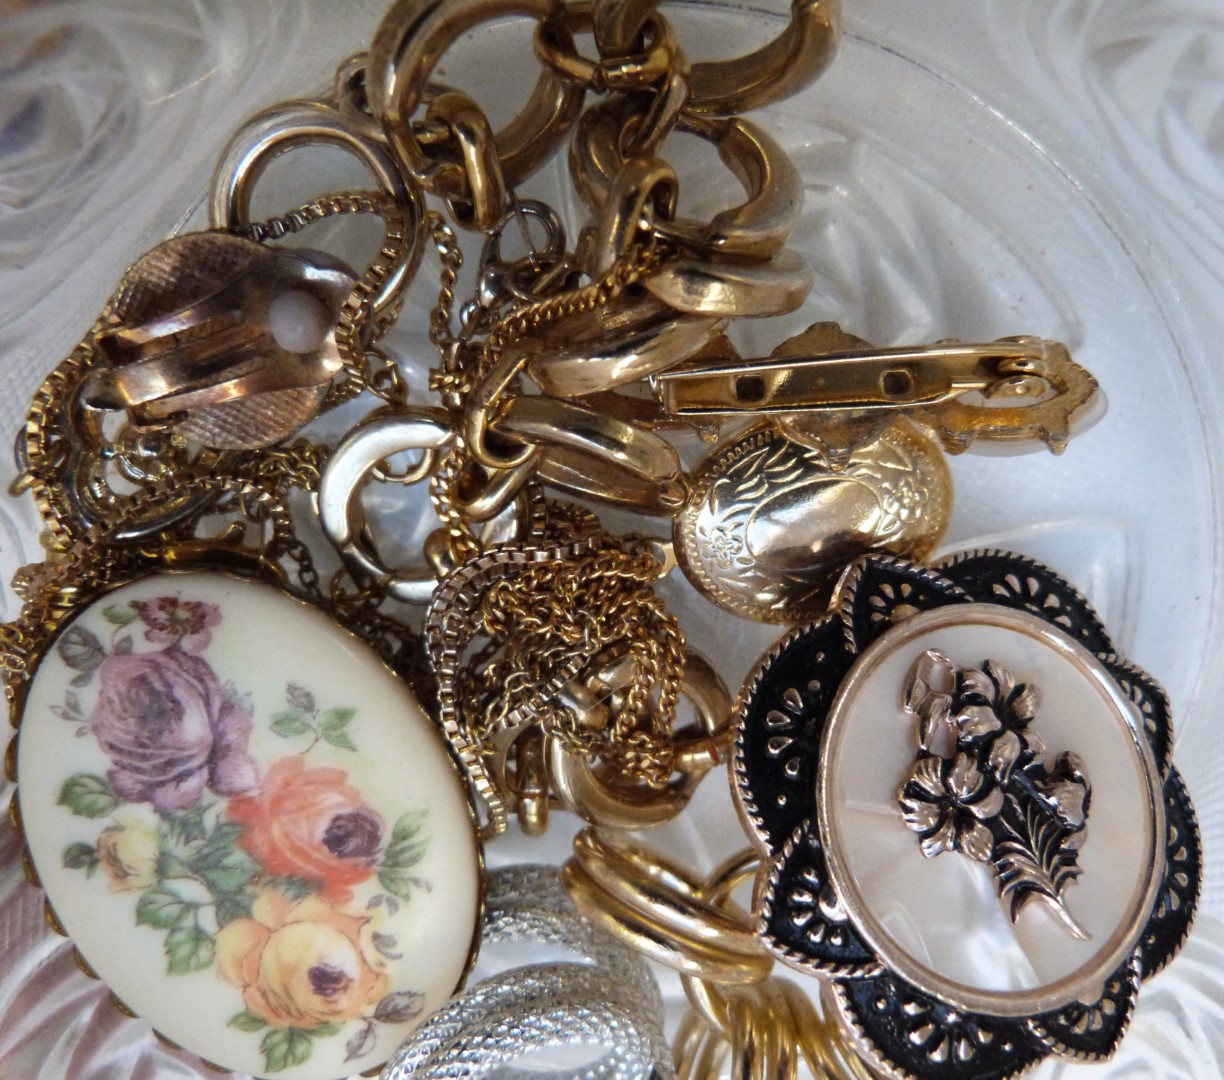 A collection of jewellery including vintage brooches, vintage earrings, beads, necklaces, etc - Image 10 of 11